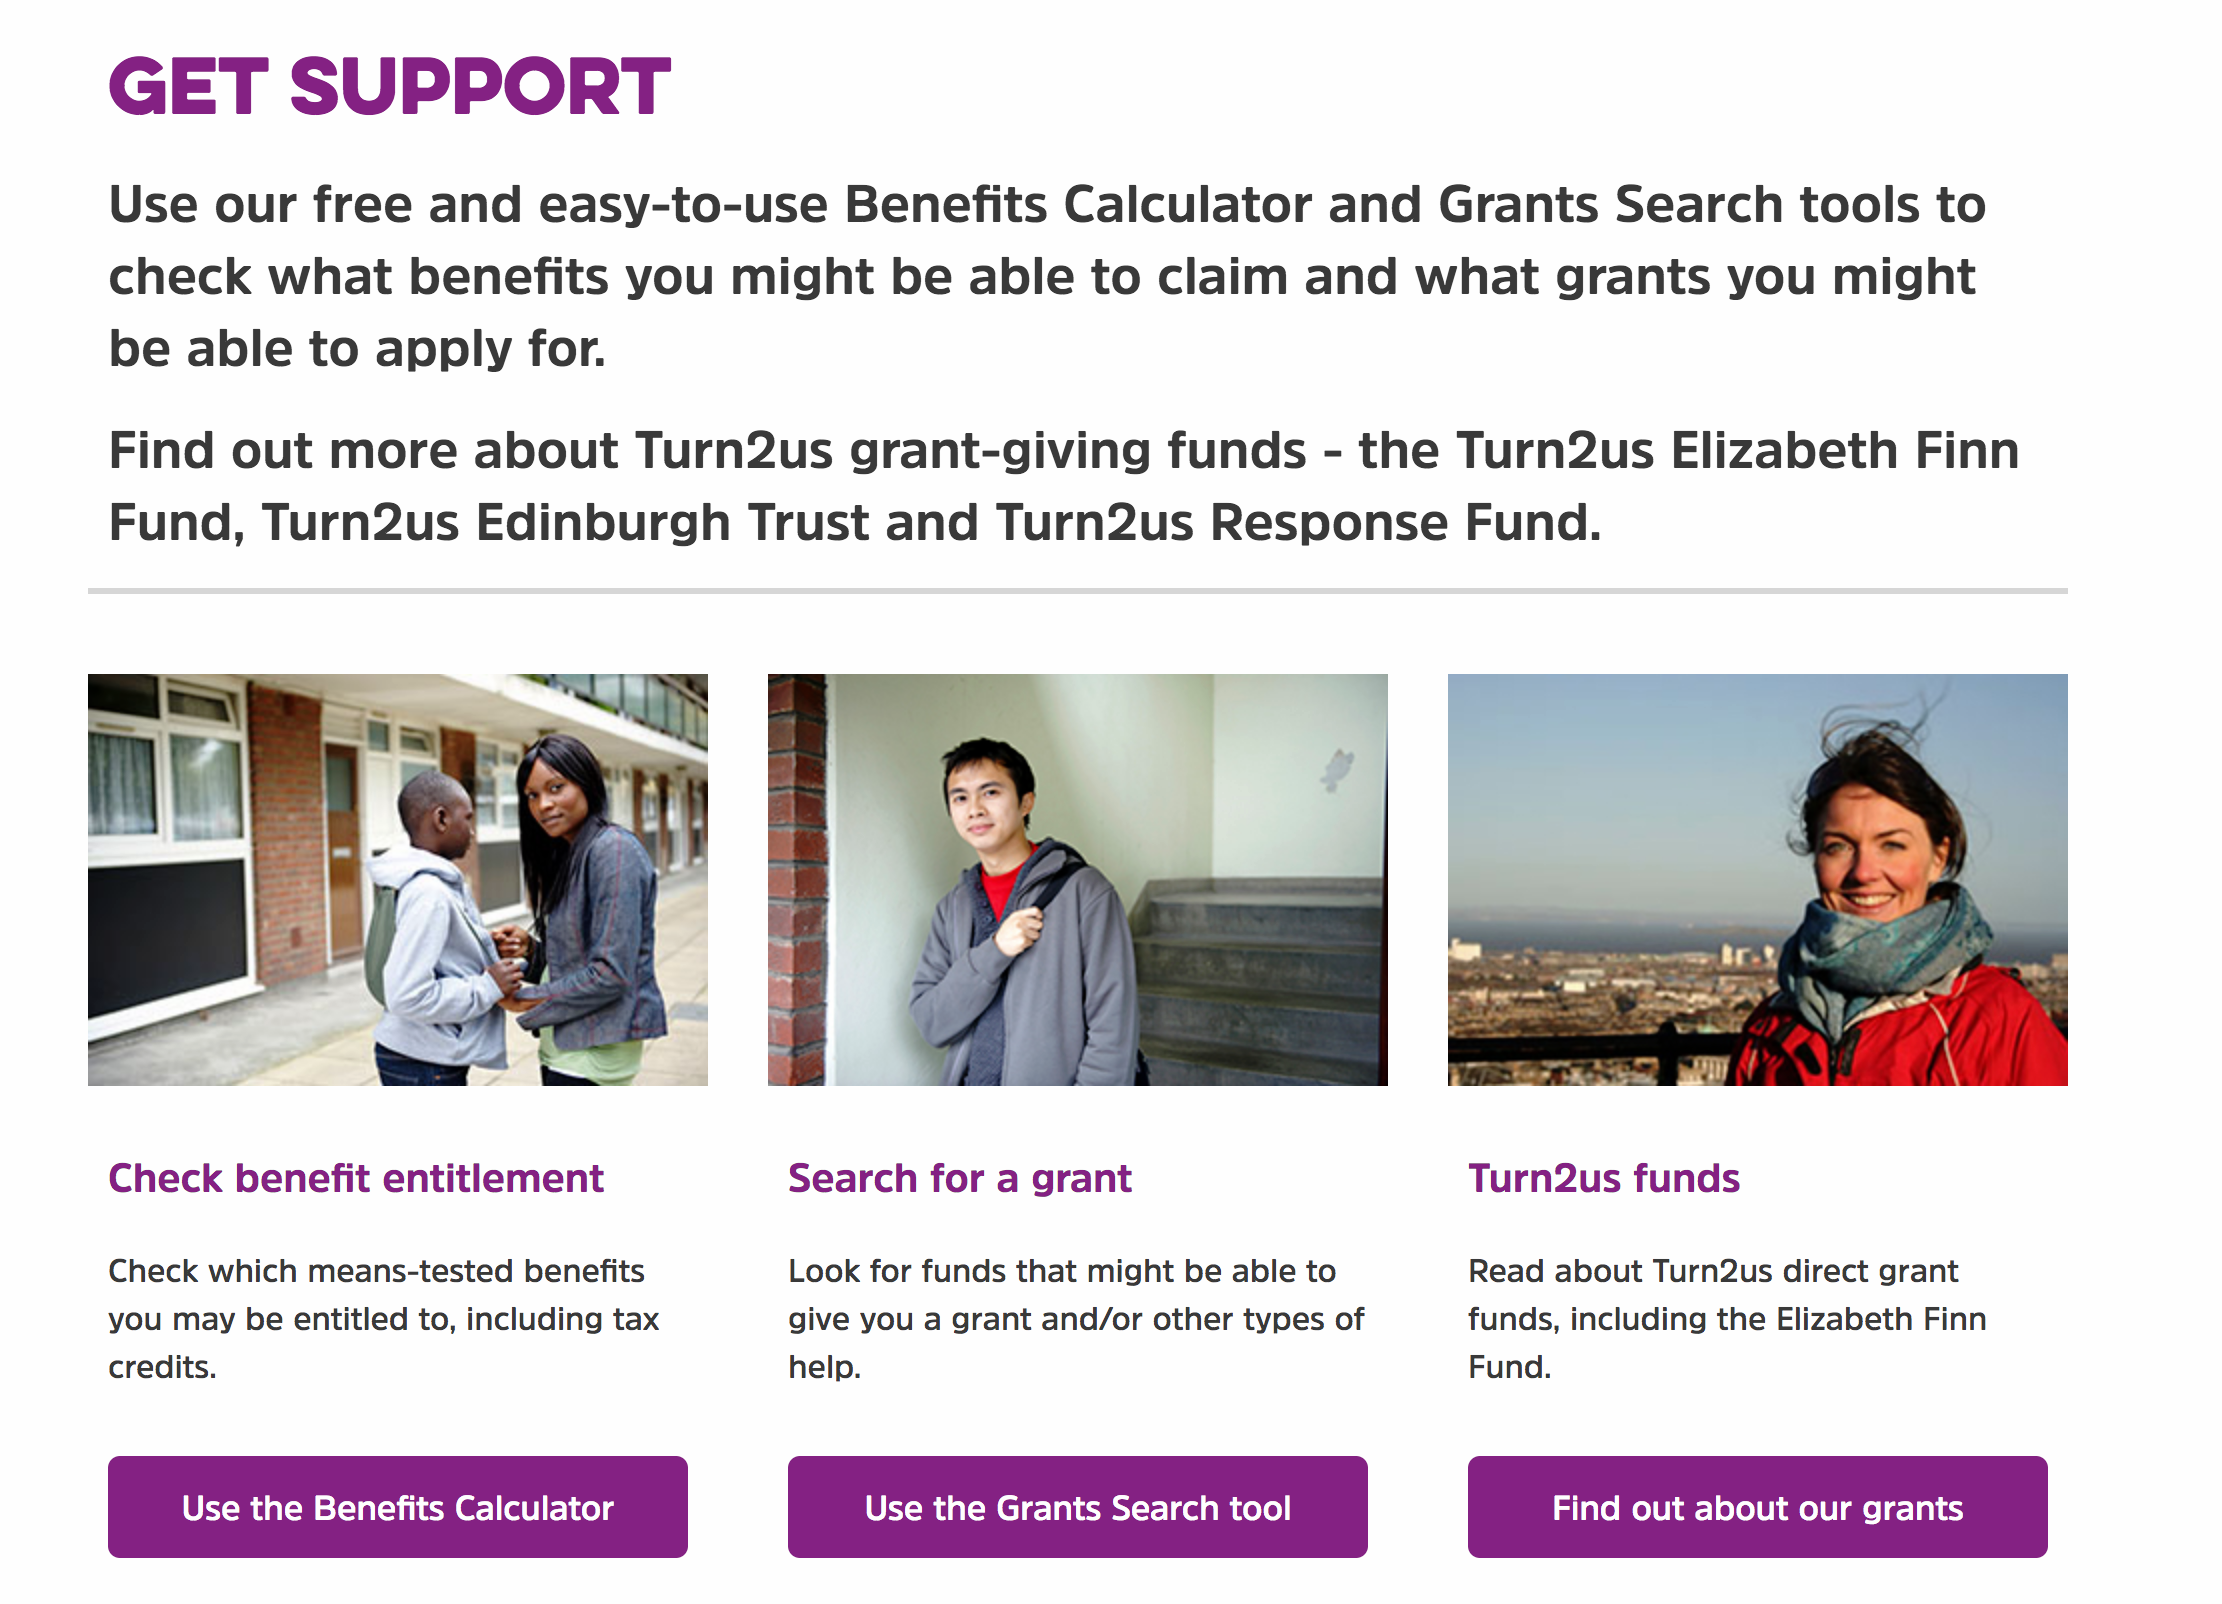  Turn2us provides financial support by helping people calculate the benefits and grants they are entitled to. 